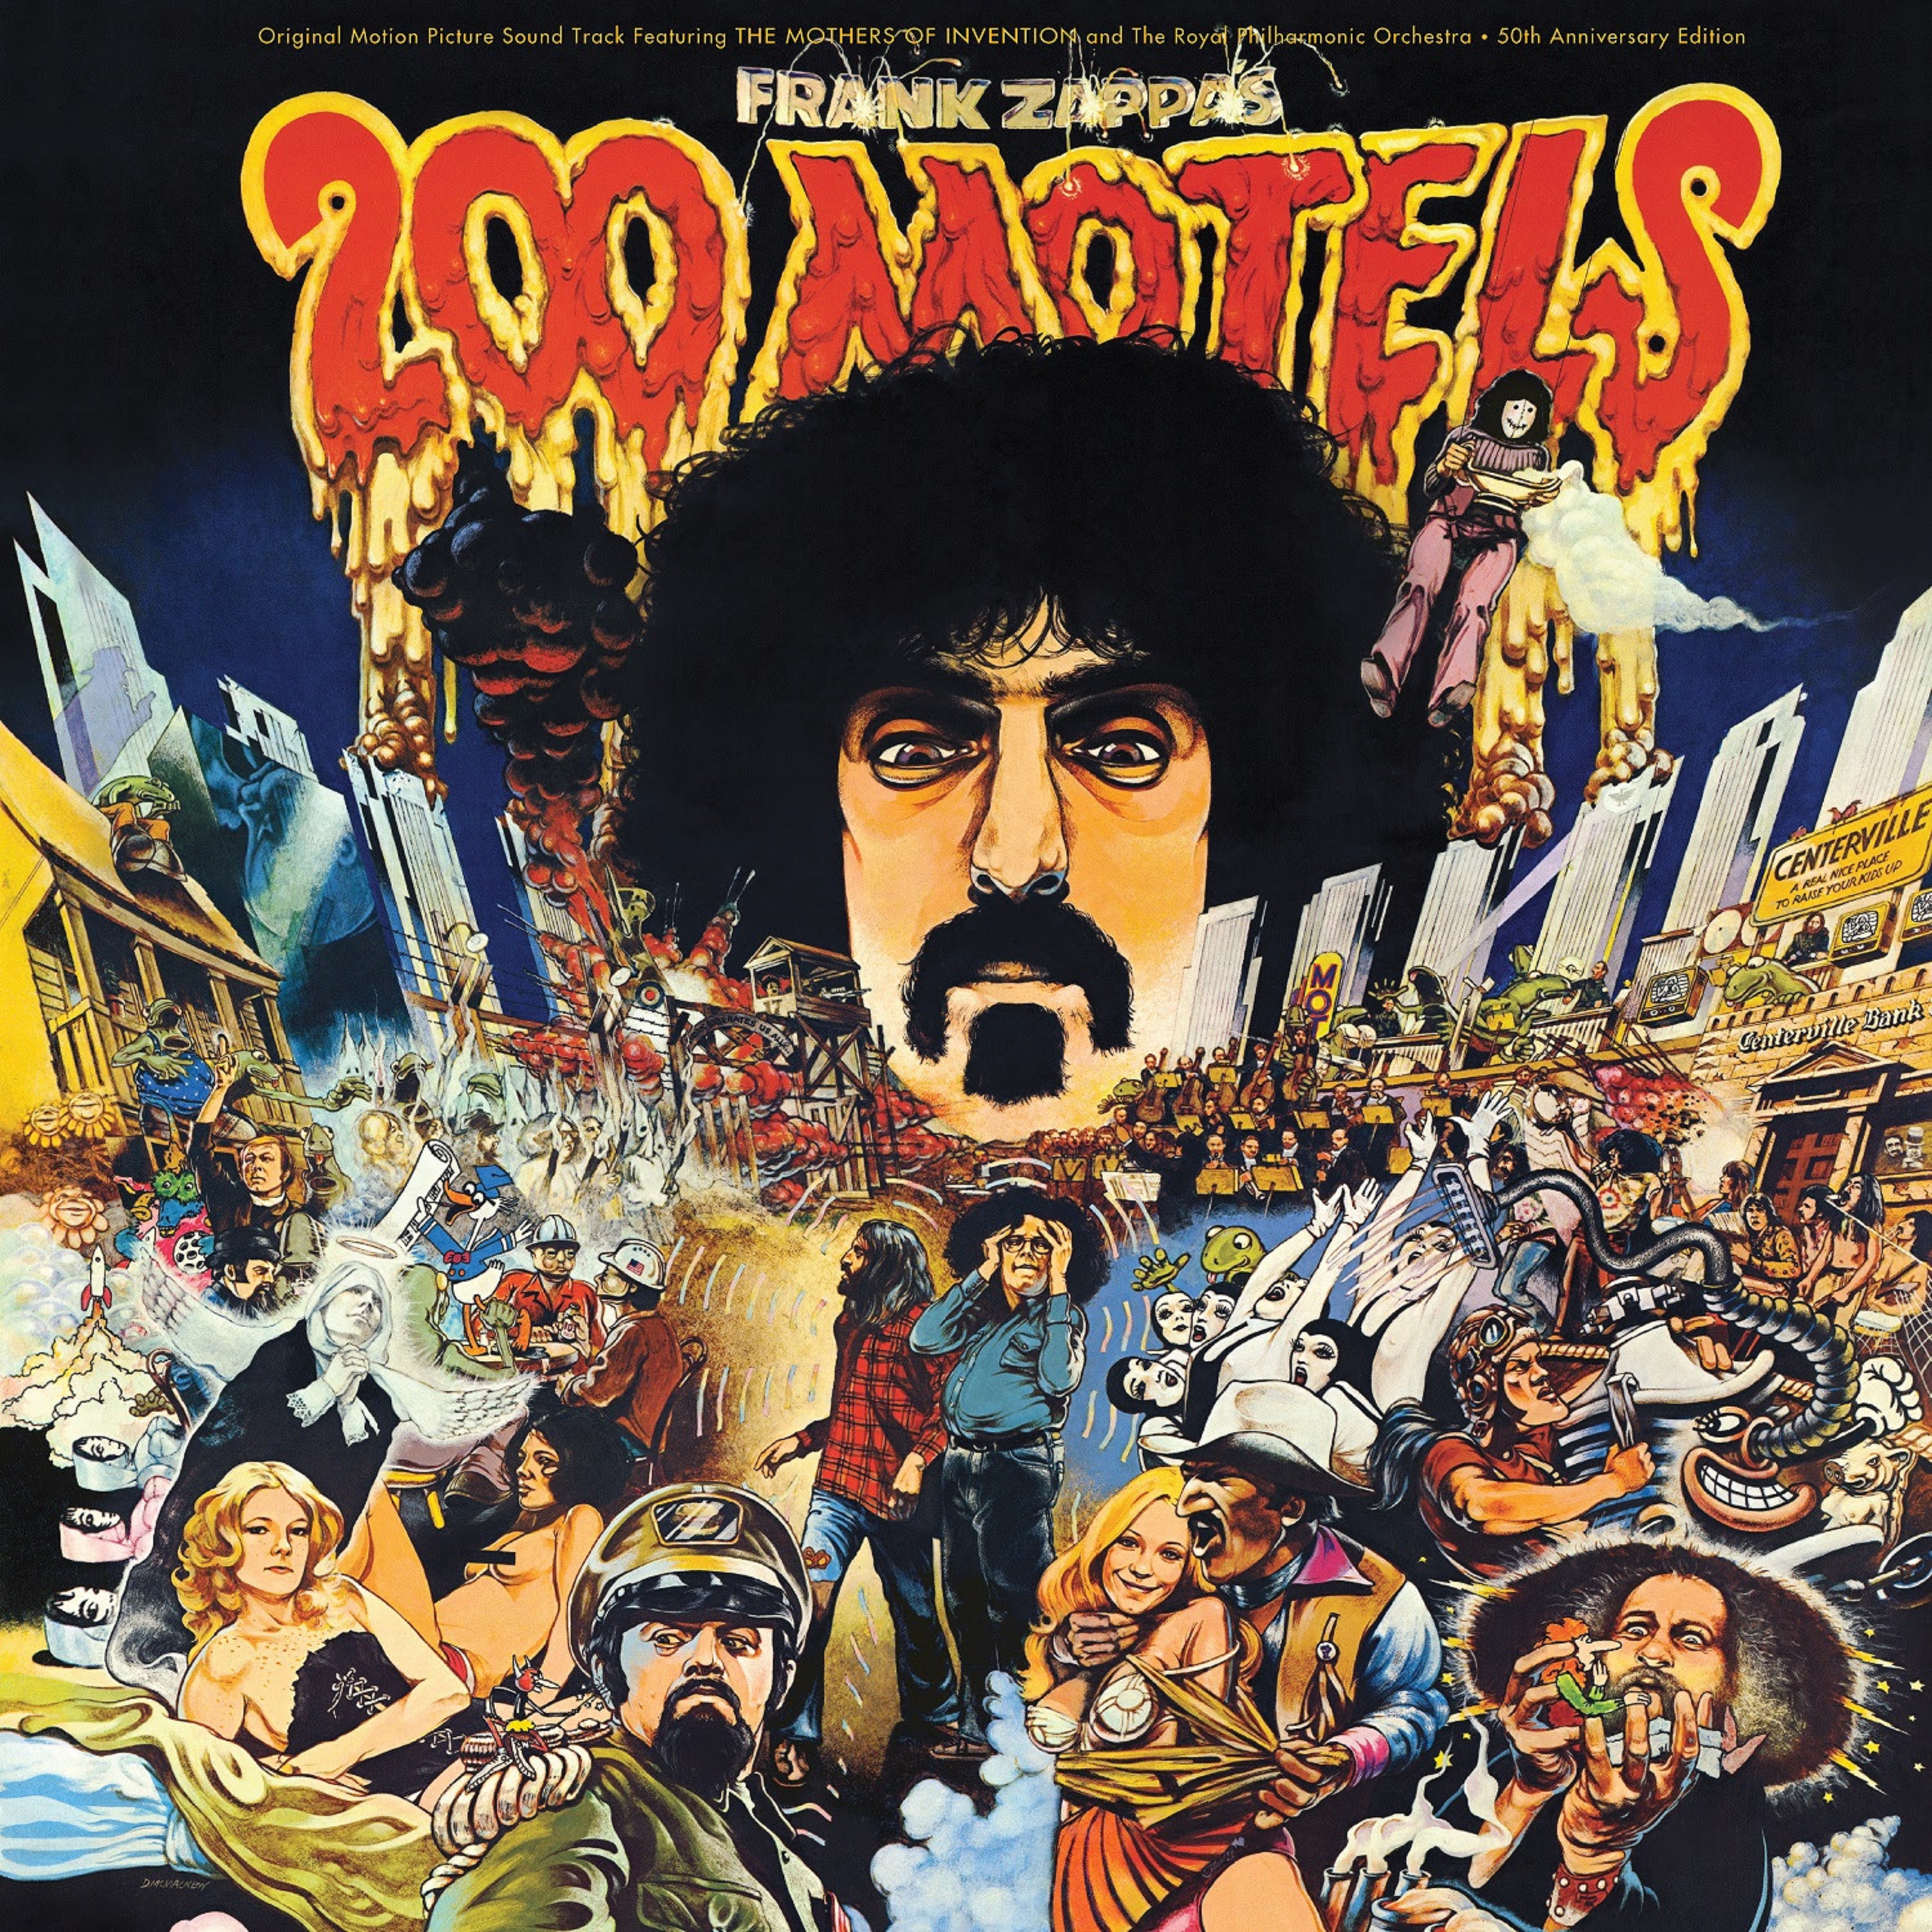 Exciting Alternate Version Of Frank Zappa's "Magic Fingers" Unveiled Today